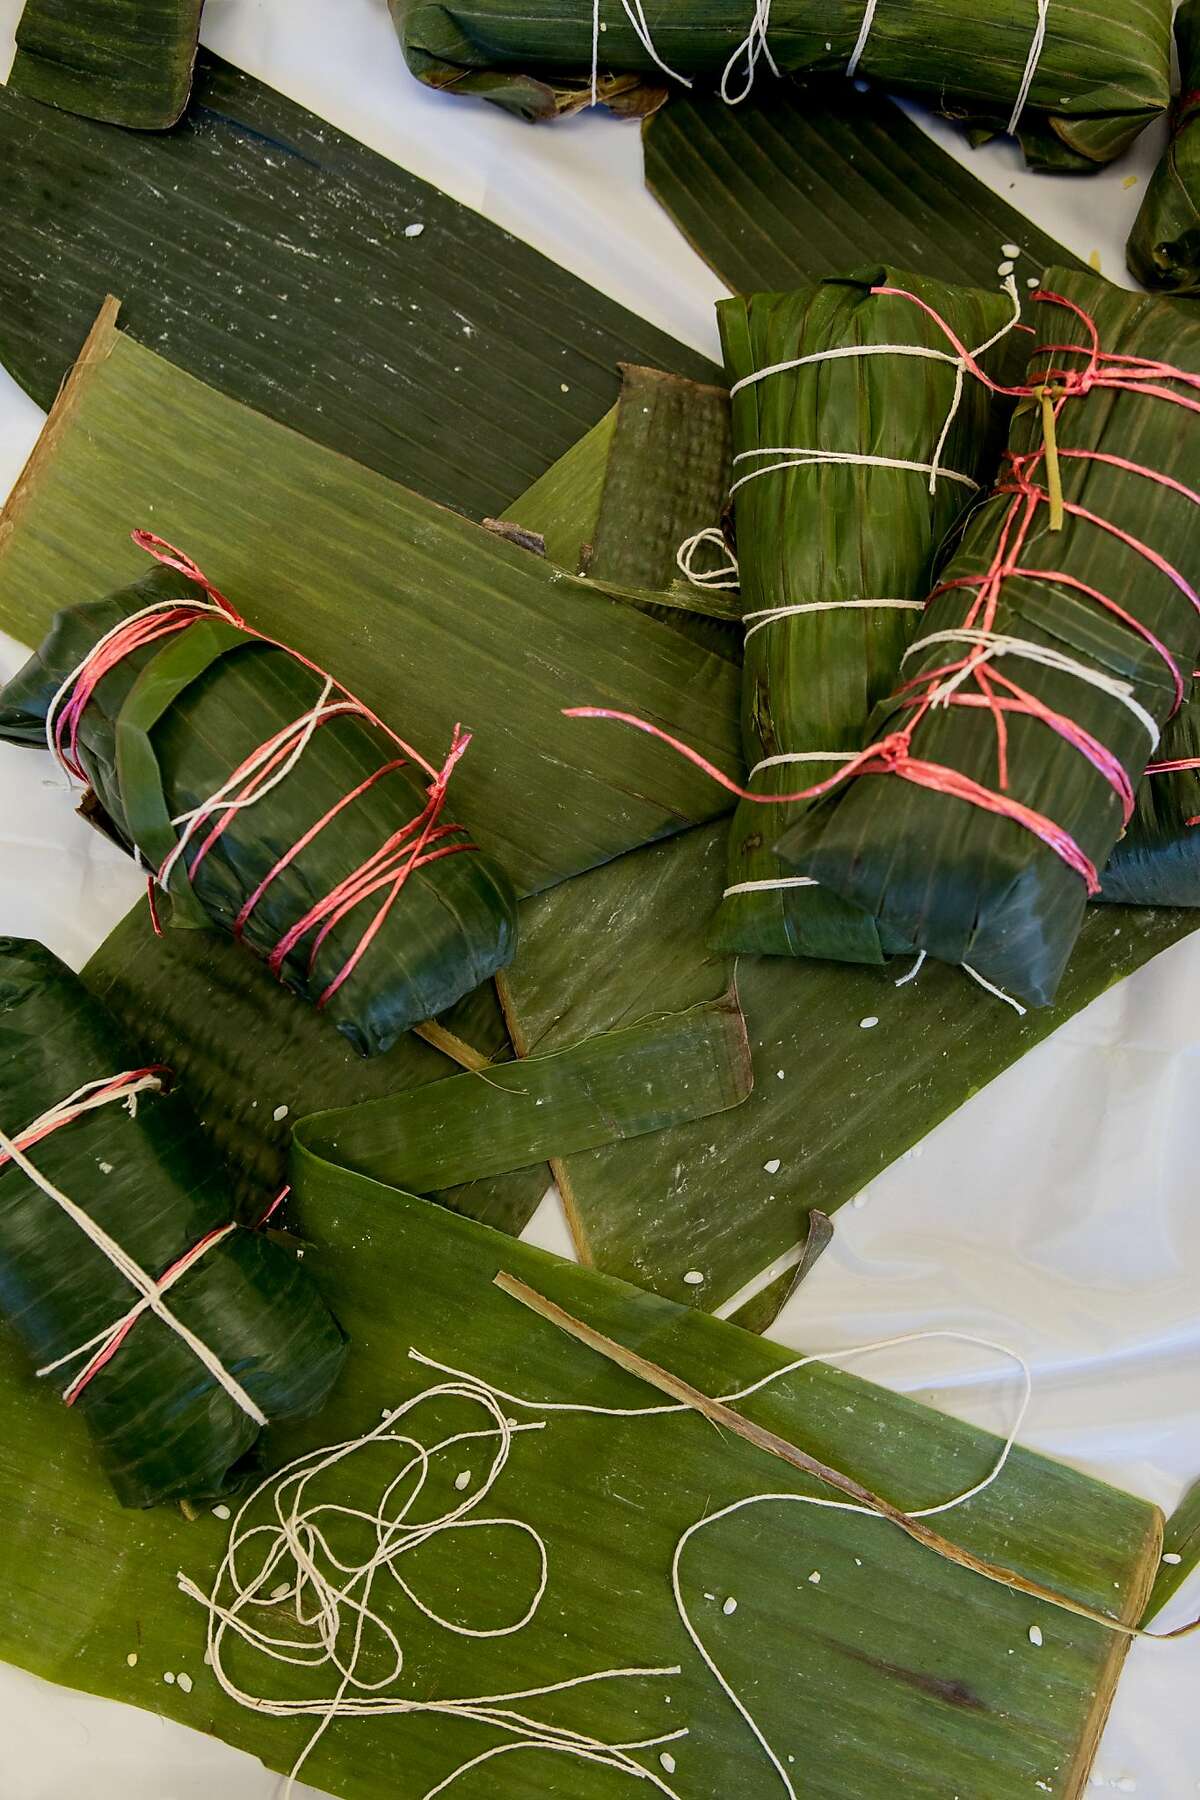 Elders are experts in tying b�nh t�t, a parcel of sticky rice, mung beans, and sweet yams wrapped in banana leaves in San Jose on February 8, 2020.